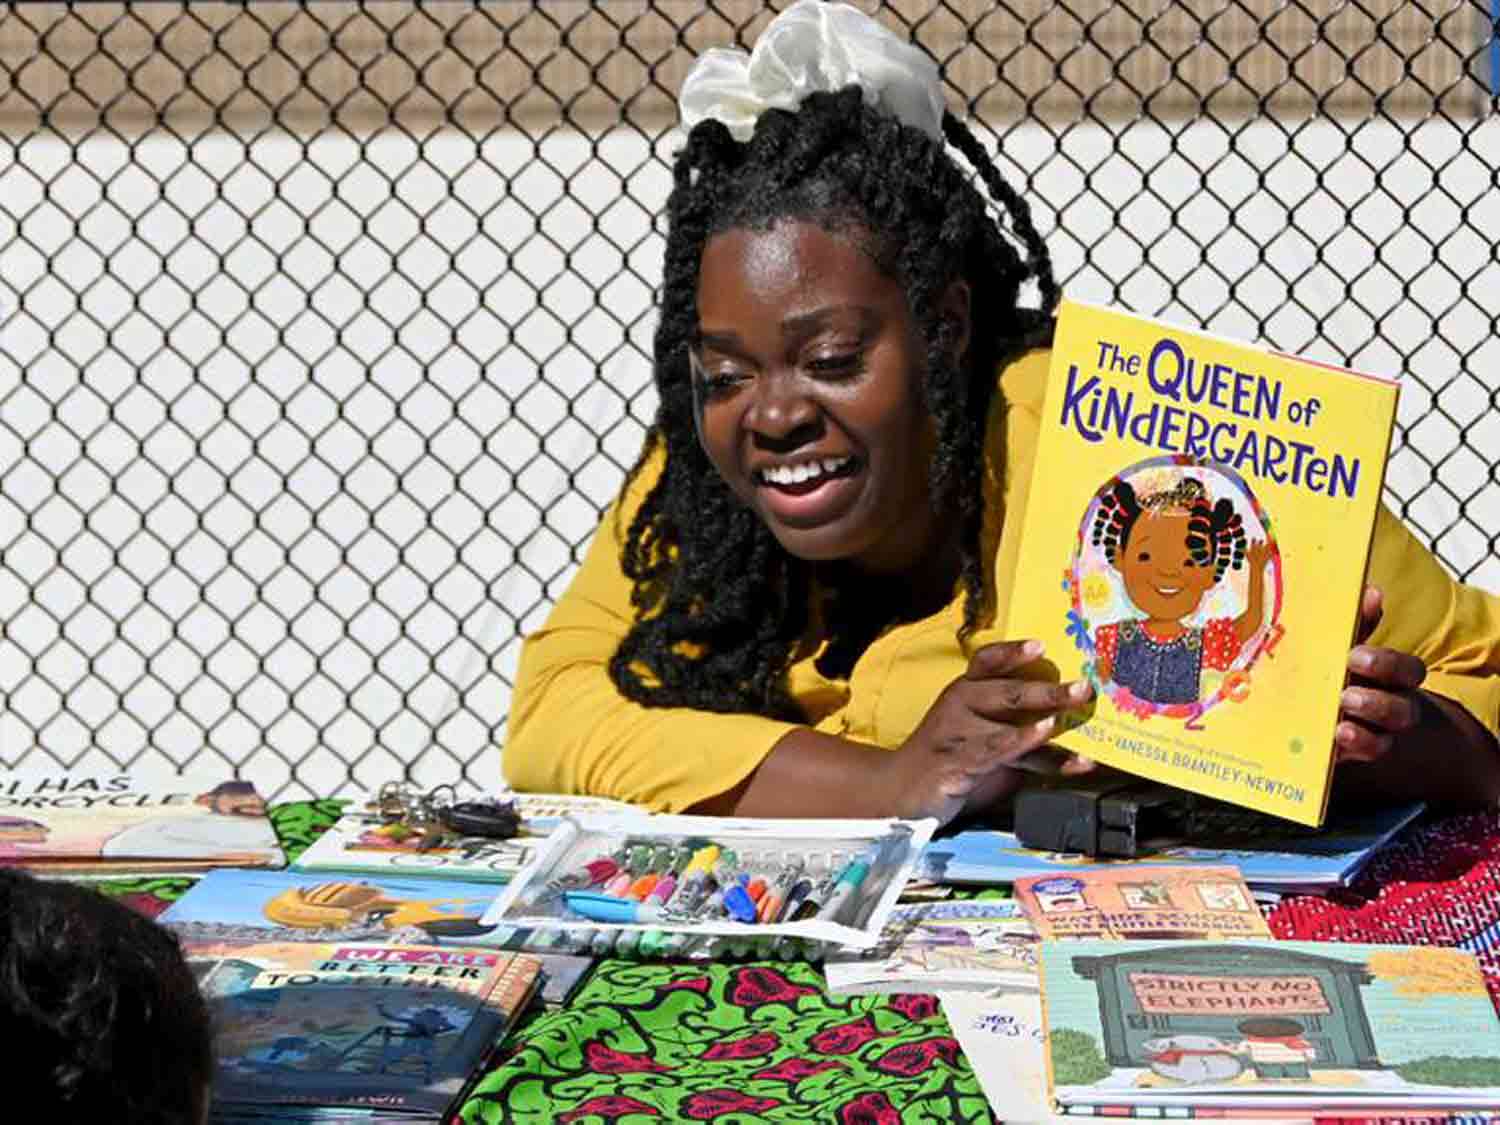 Storybook Maze smiles at a child while sitting behind a table of books and holding up a book called Queen of Kindergarten.